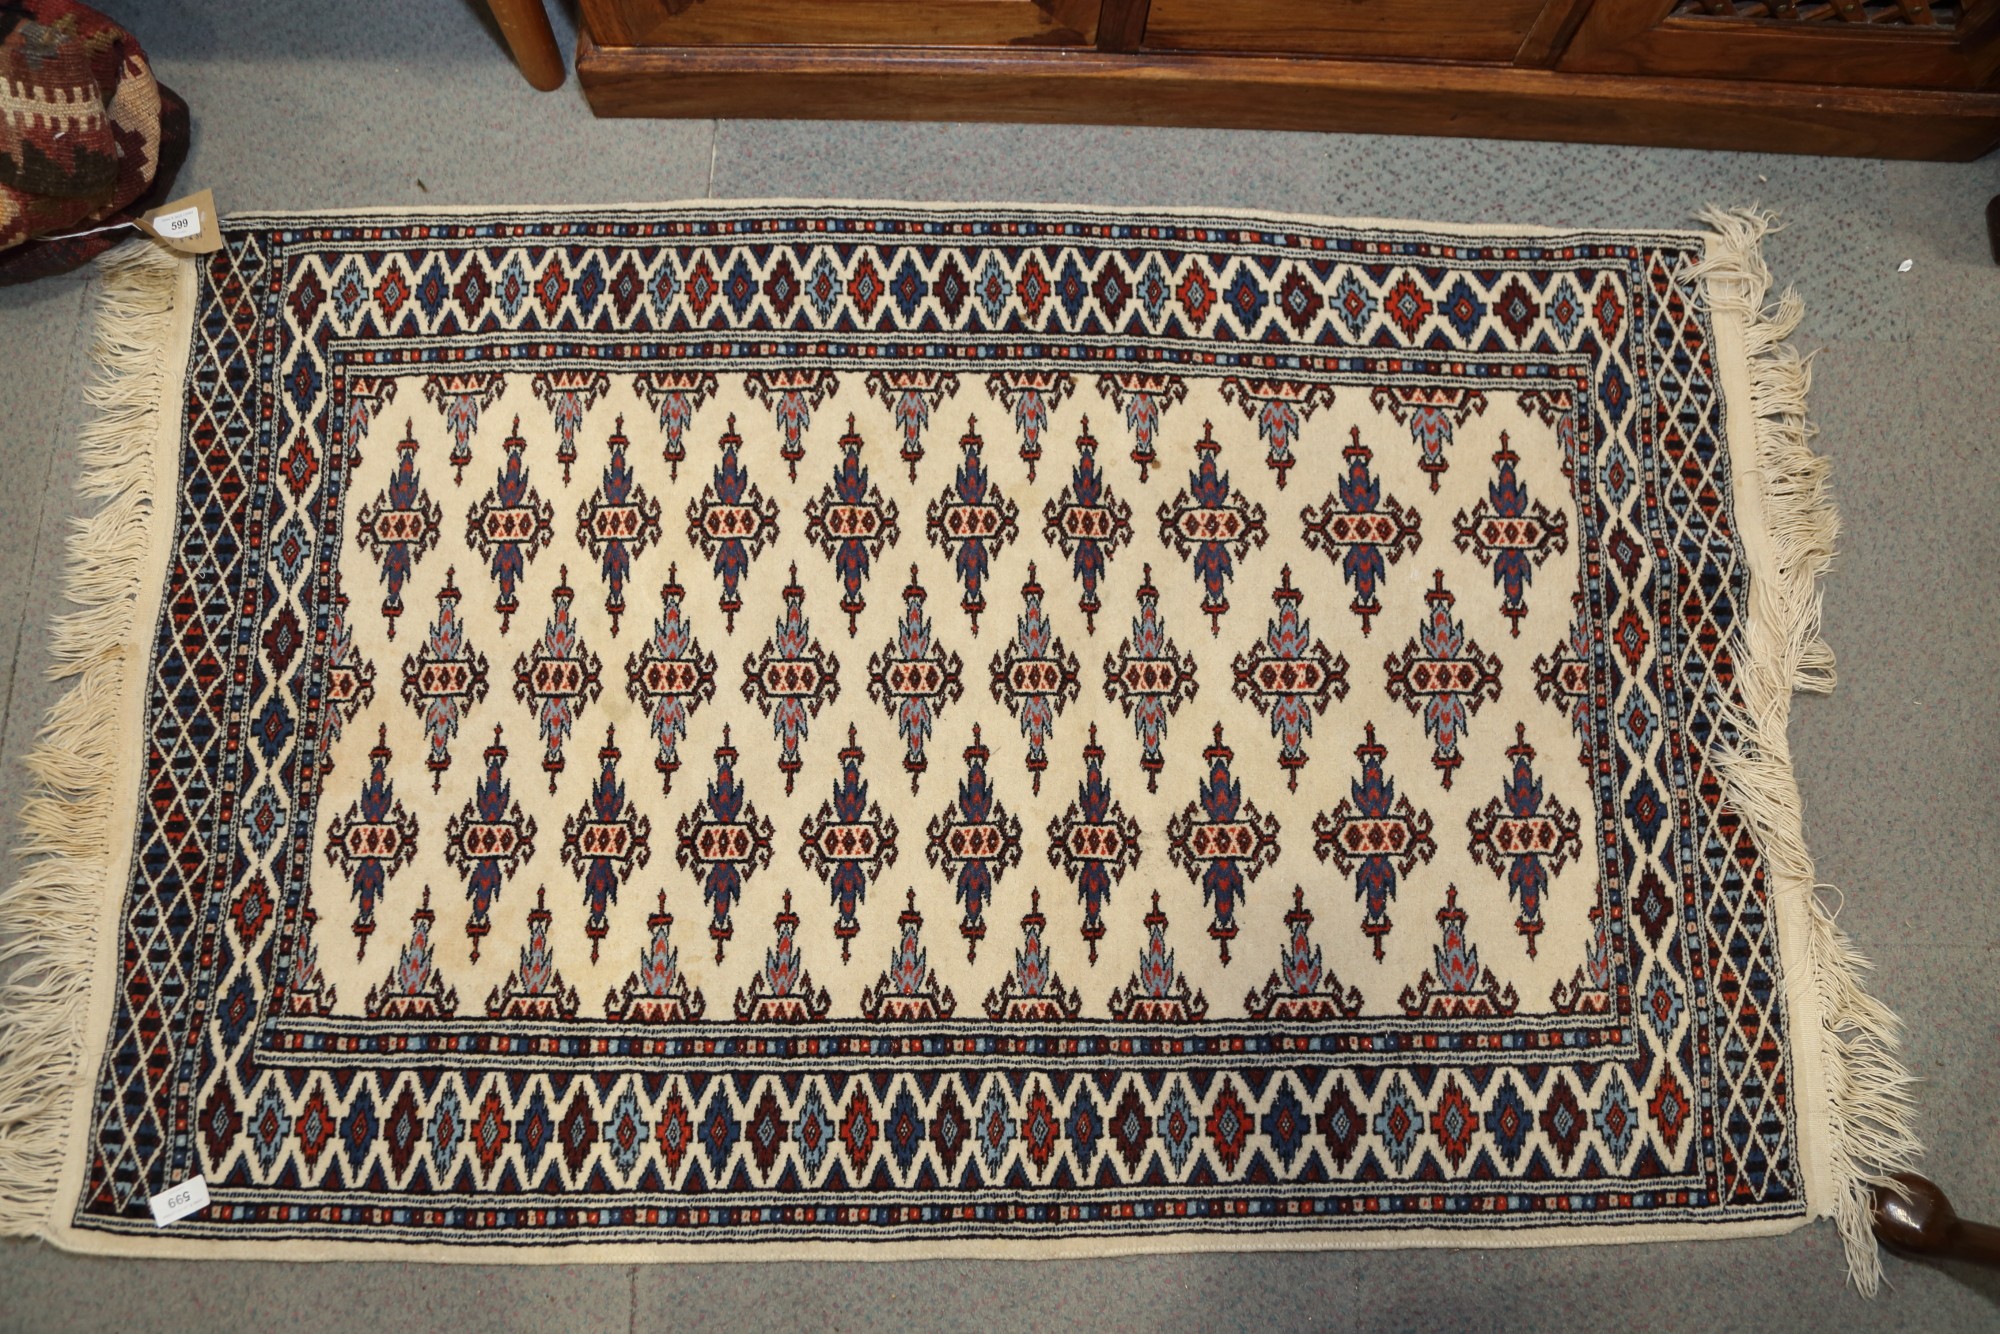 A Bokhara rug with twenty-nine hooked guls on a cream ground, 48" x 31" approx